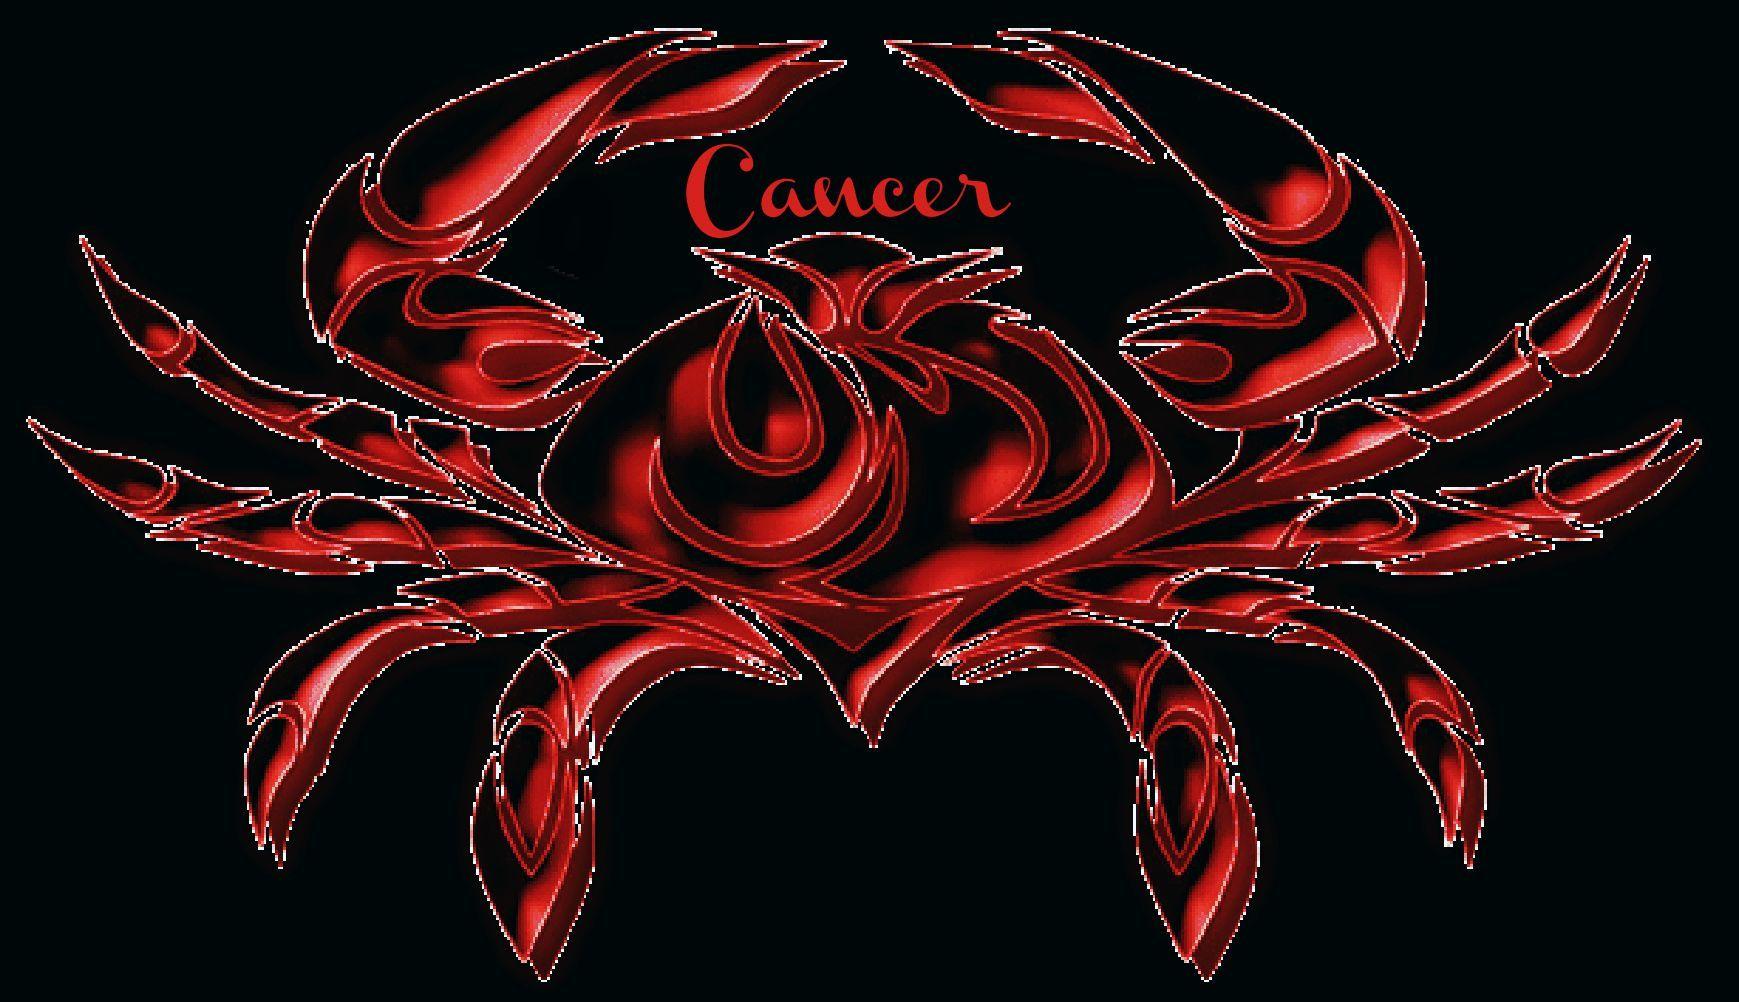 Awesome cancer sign wallpaper image. zodiac.CANCER